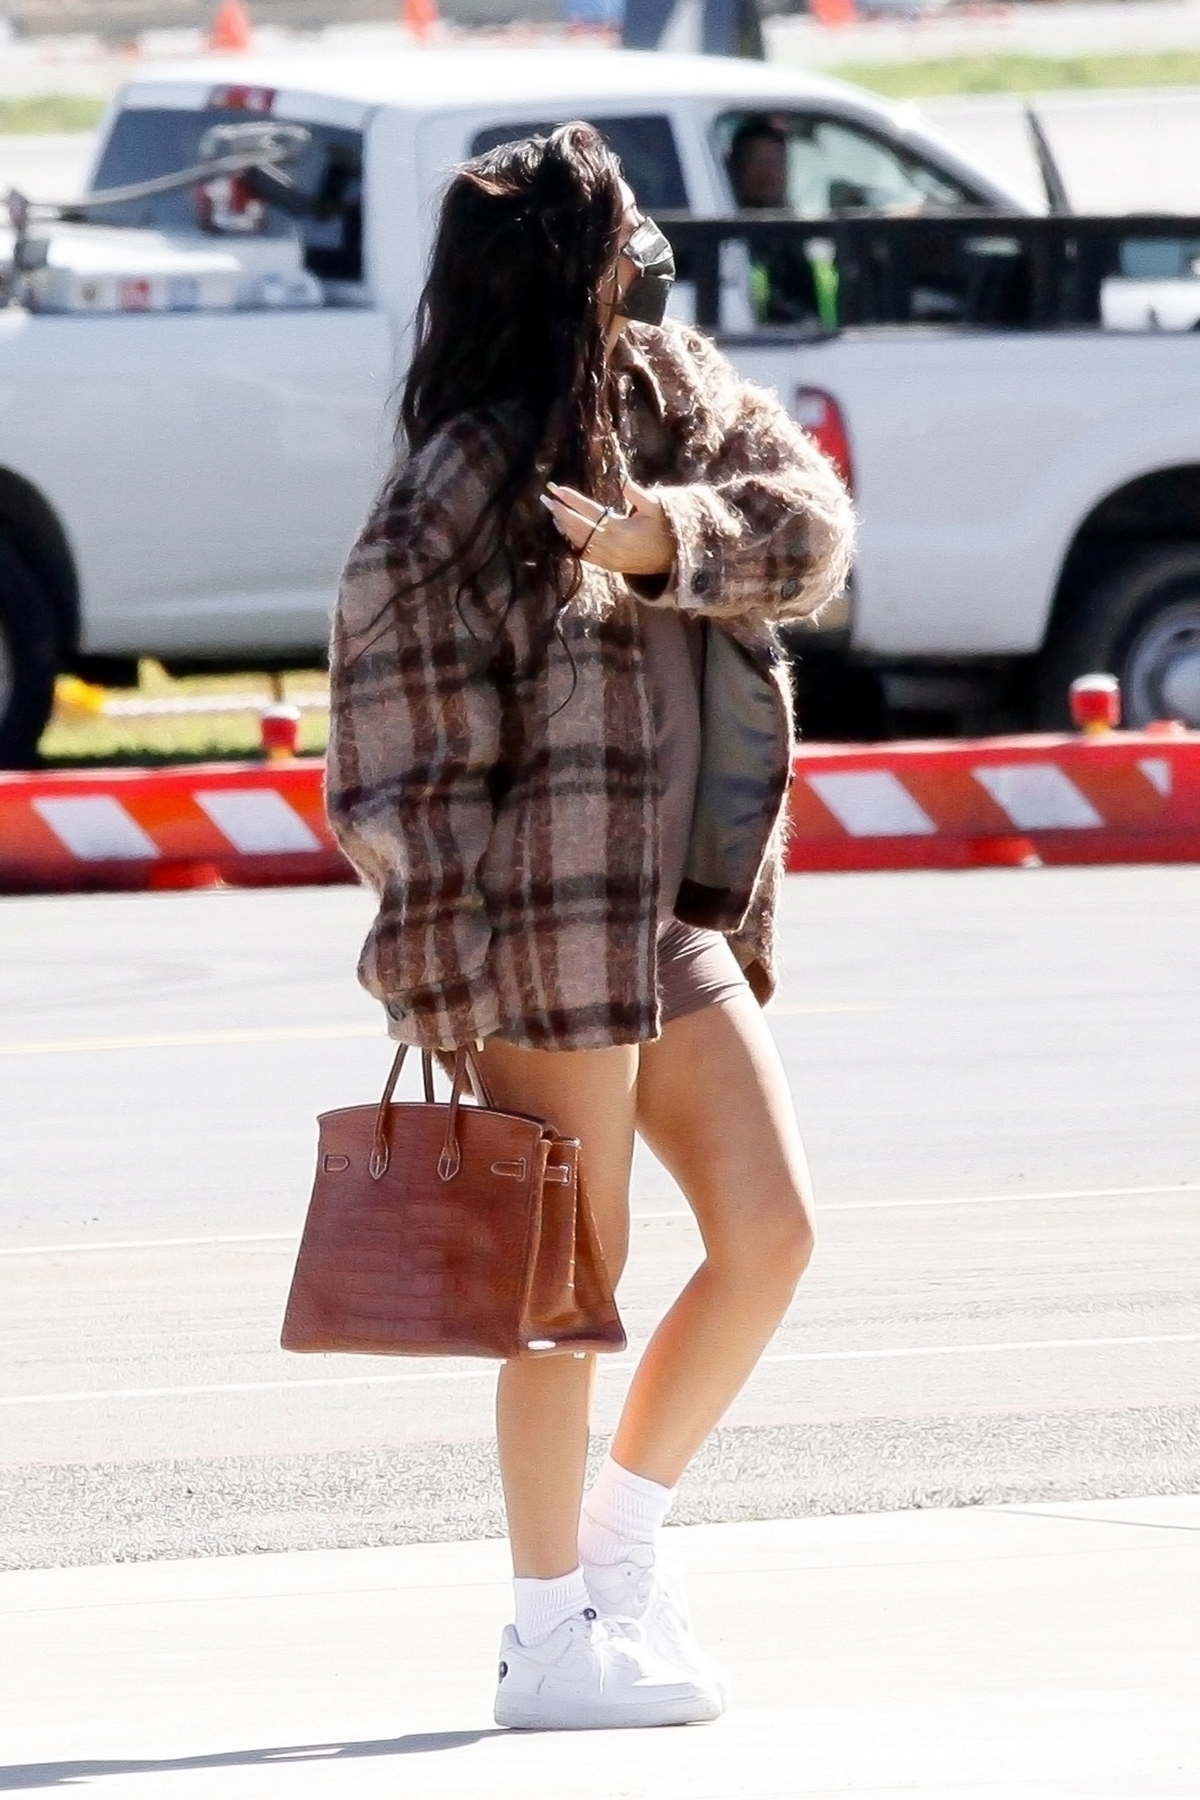 Kylie Jenner Puts On A Leggy Display While Boarding A Private Jet With